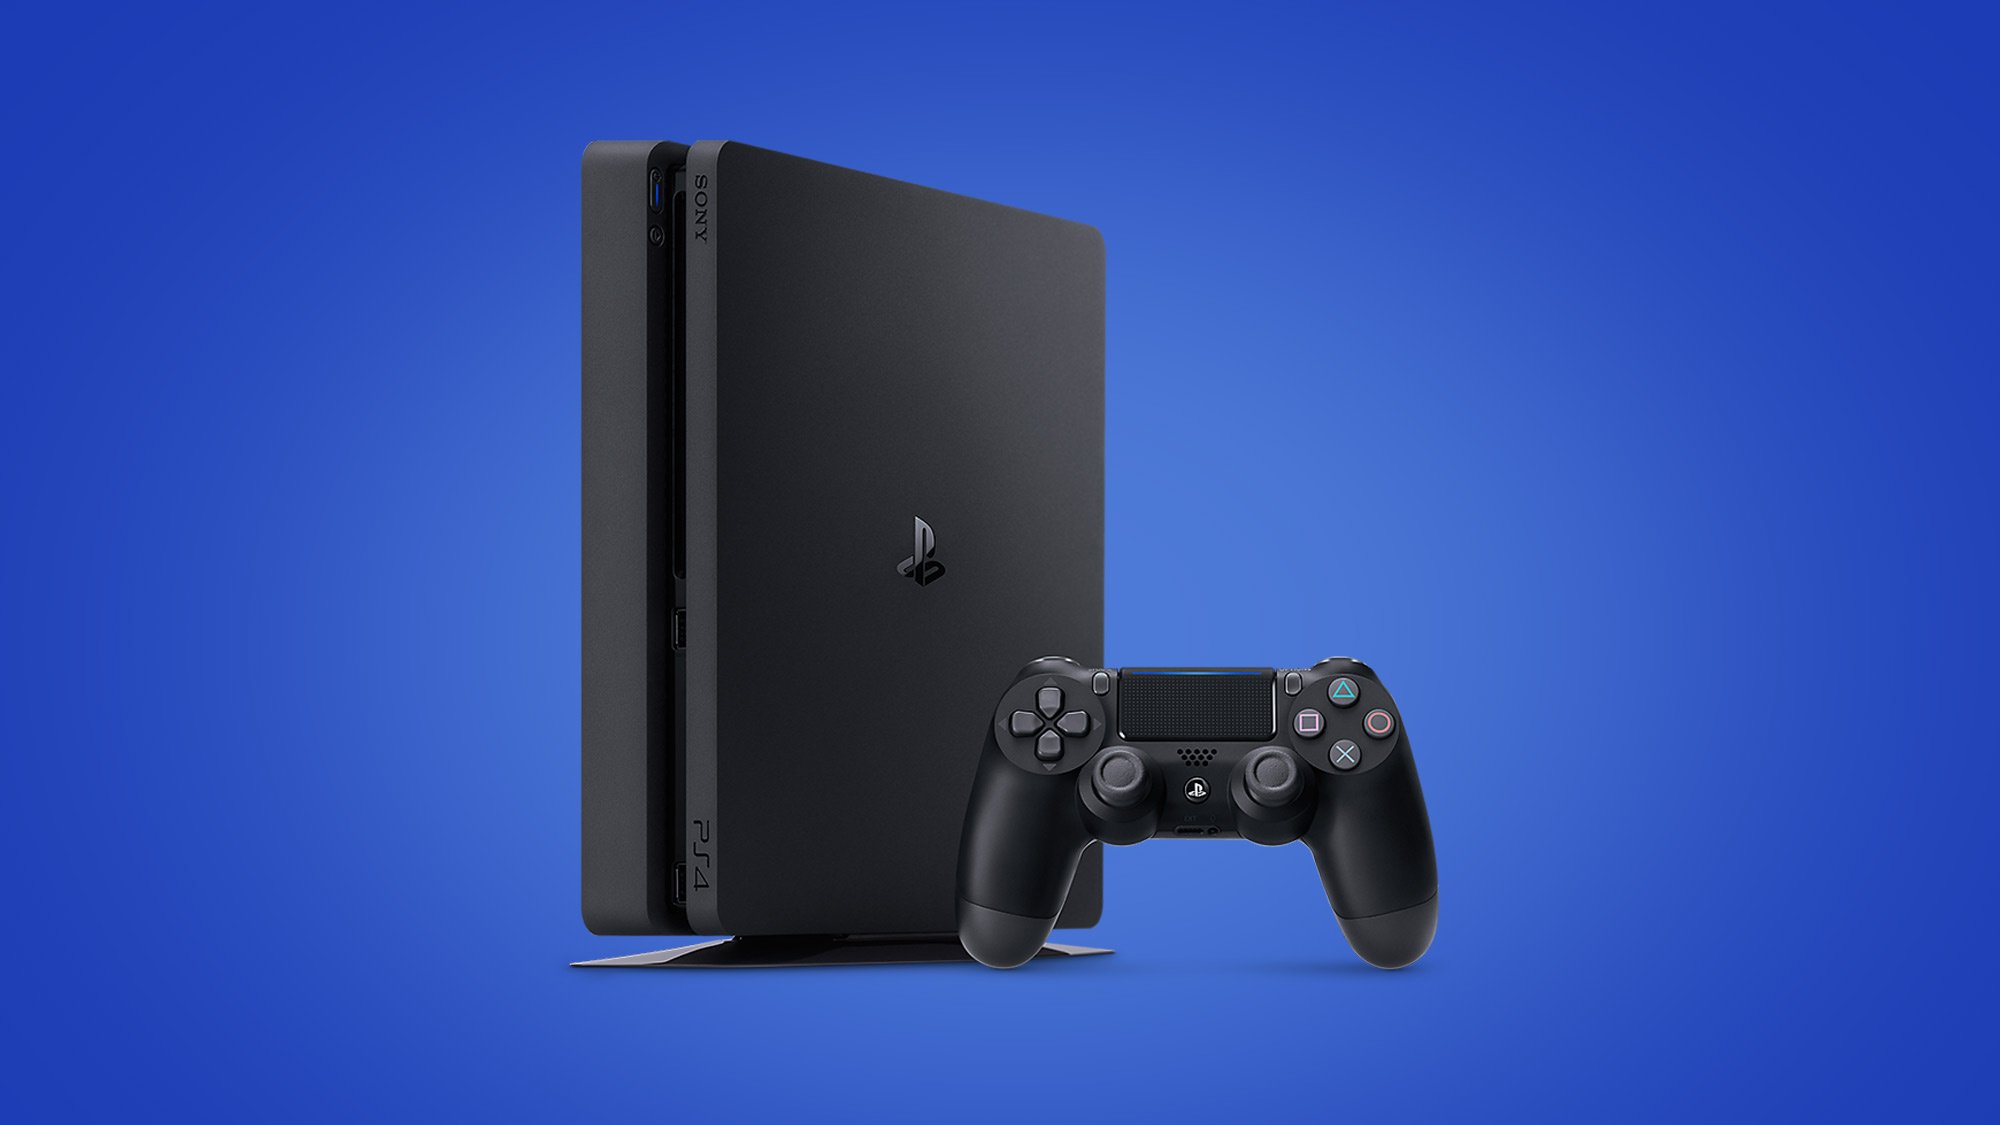 Is PS4 worth buying in 2021?